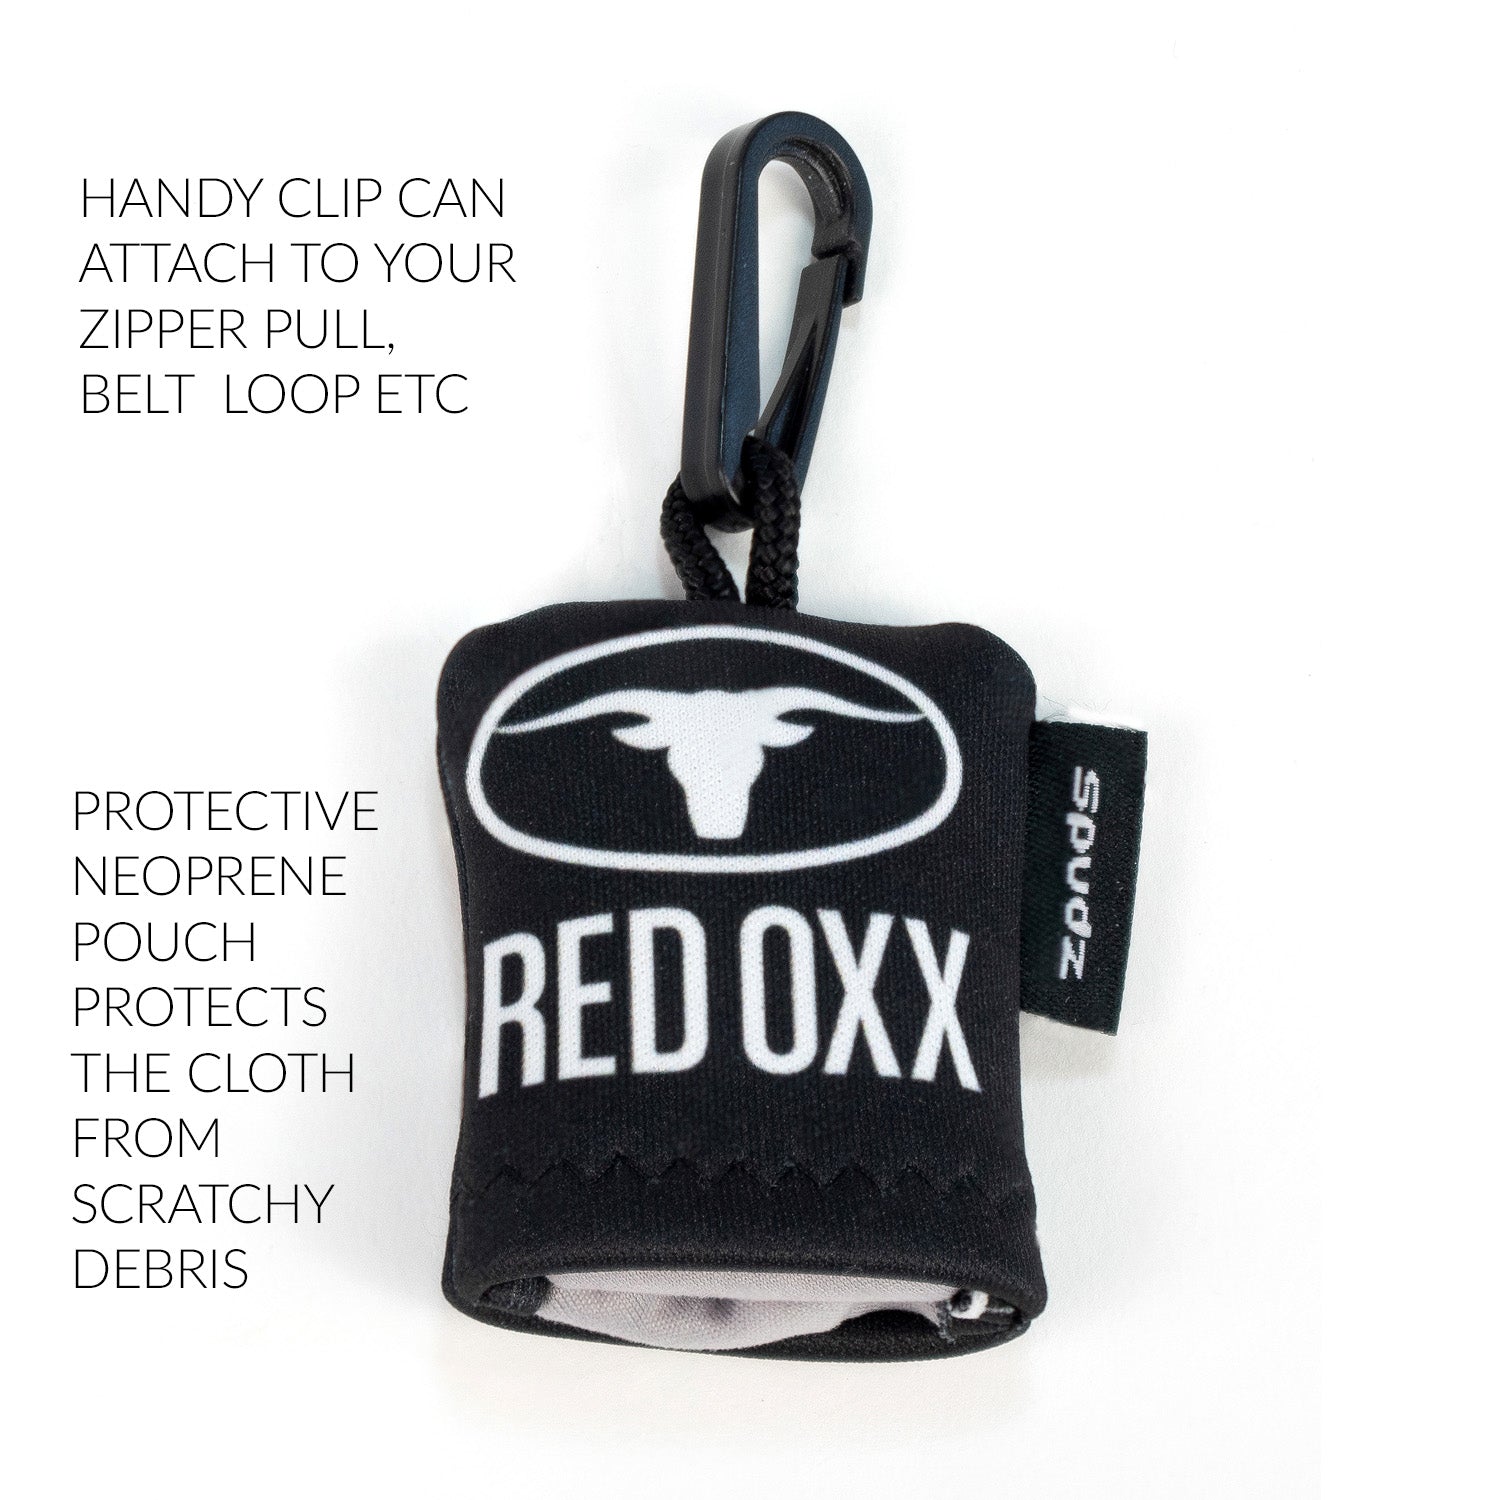 Handy clip can attach to your zipper pull, belt loop, etc.  Protective neoprene pouch protects the cloth from scratchy debris. 